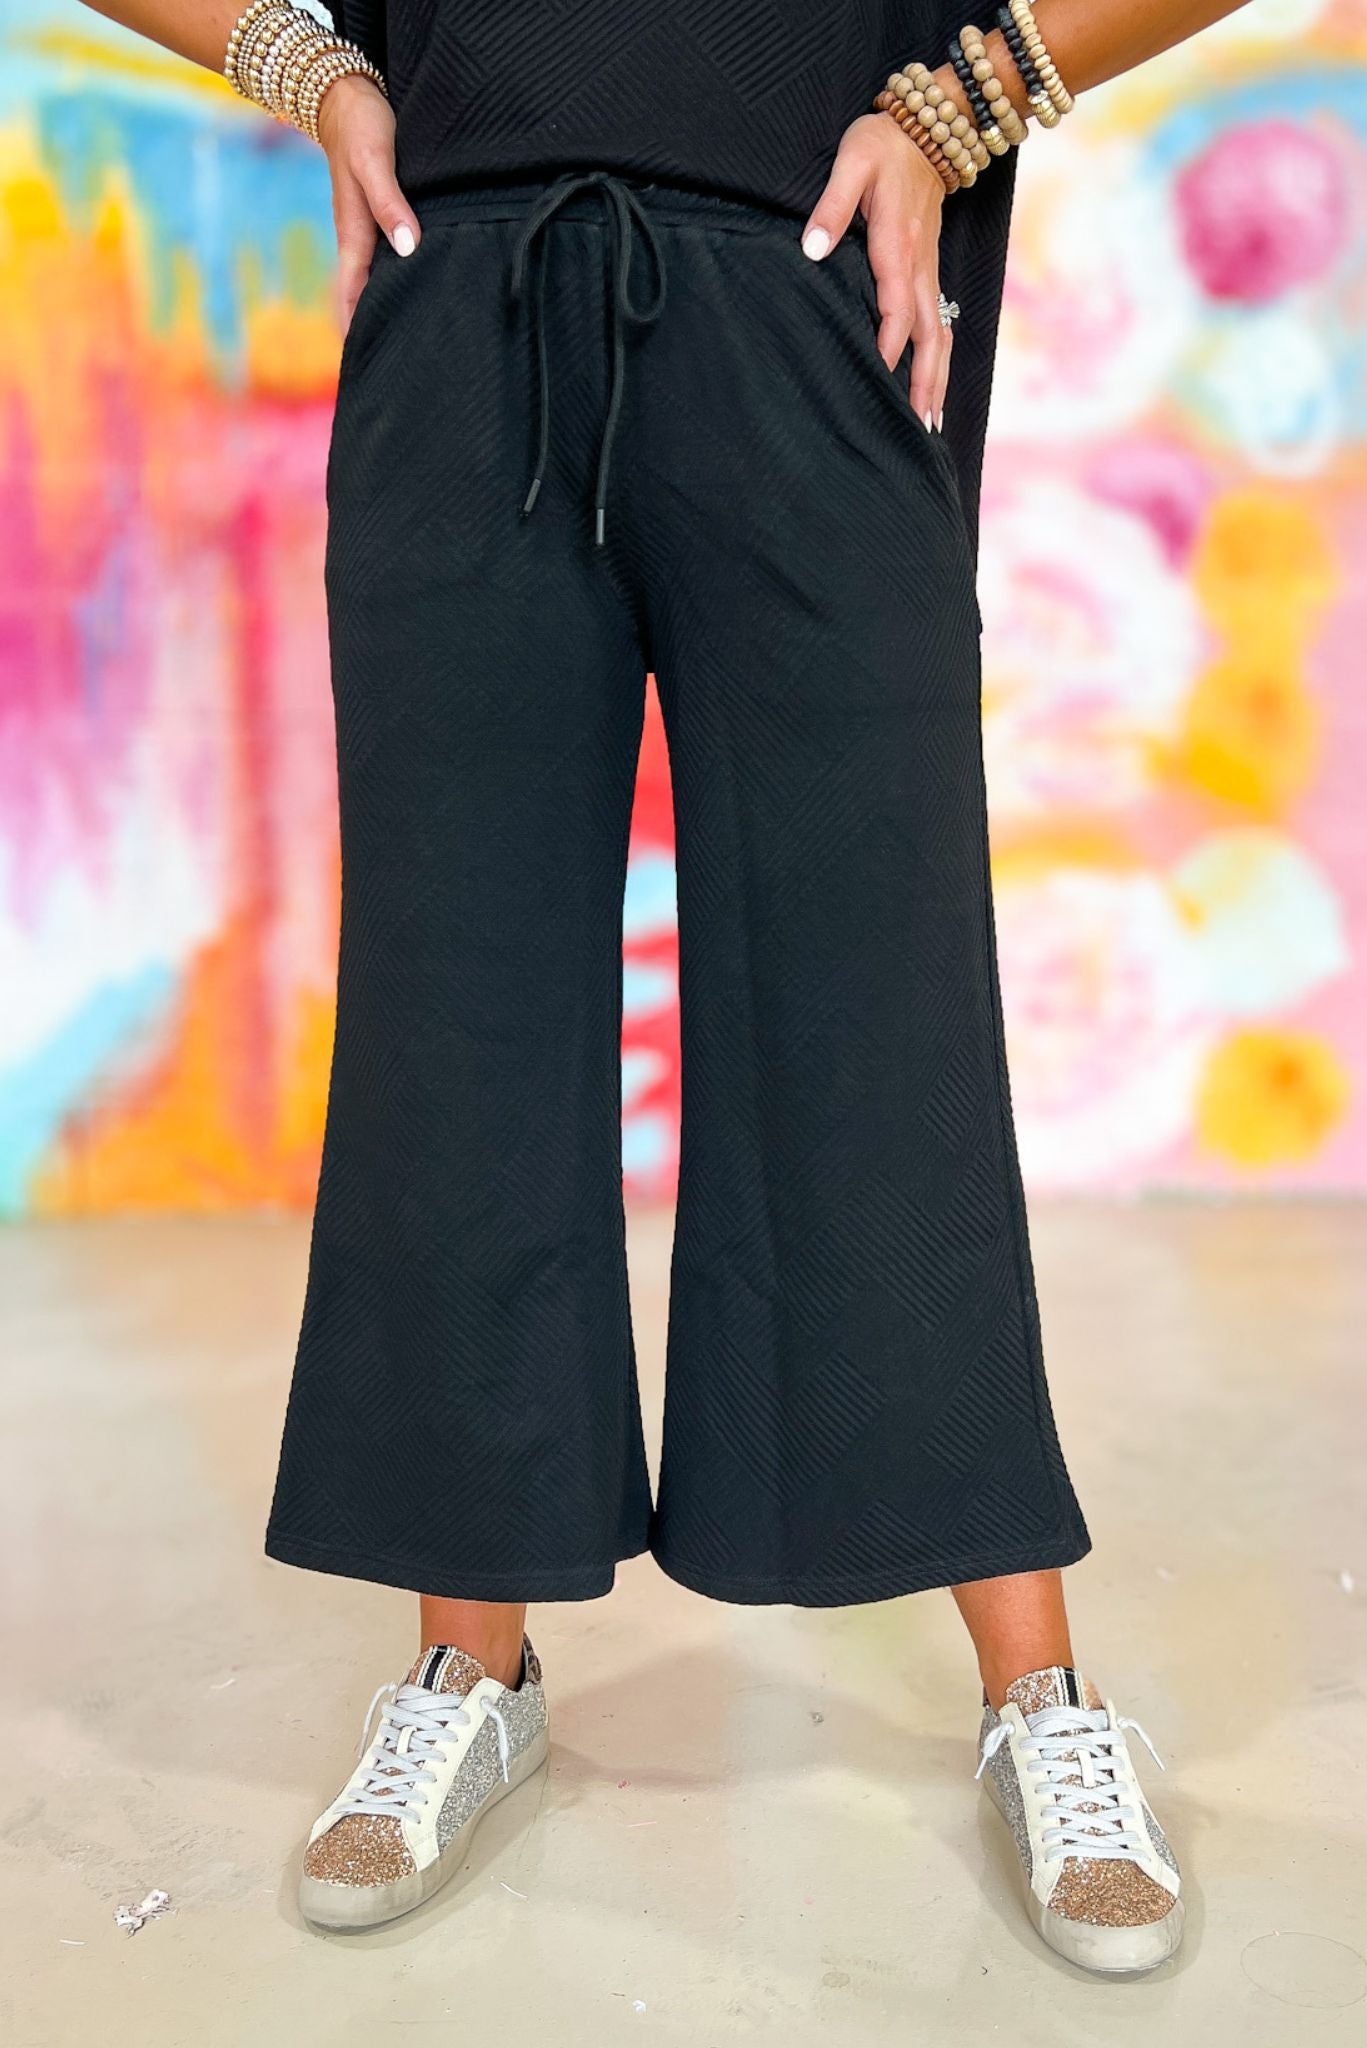 Black Textured Drop Shoulder Wide Leg Pants Set, fall transition piece, chic updated pant, versatile top, mom style, running errands, easy to style, matching set, shop style your senses by mallory fitzsimmons